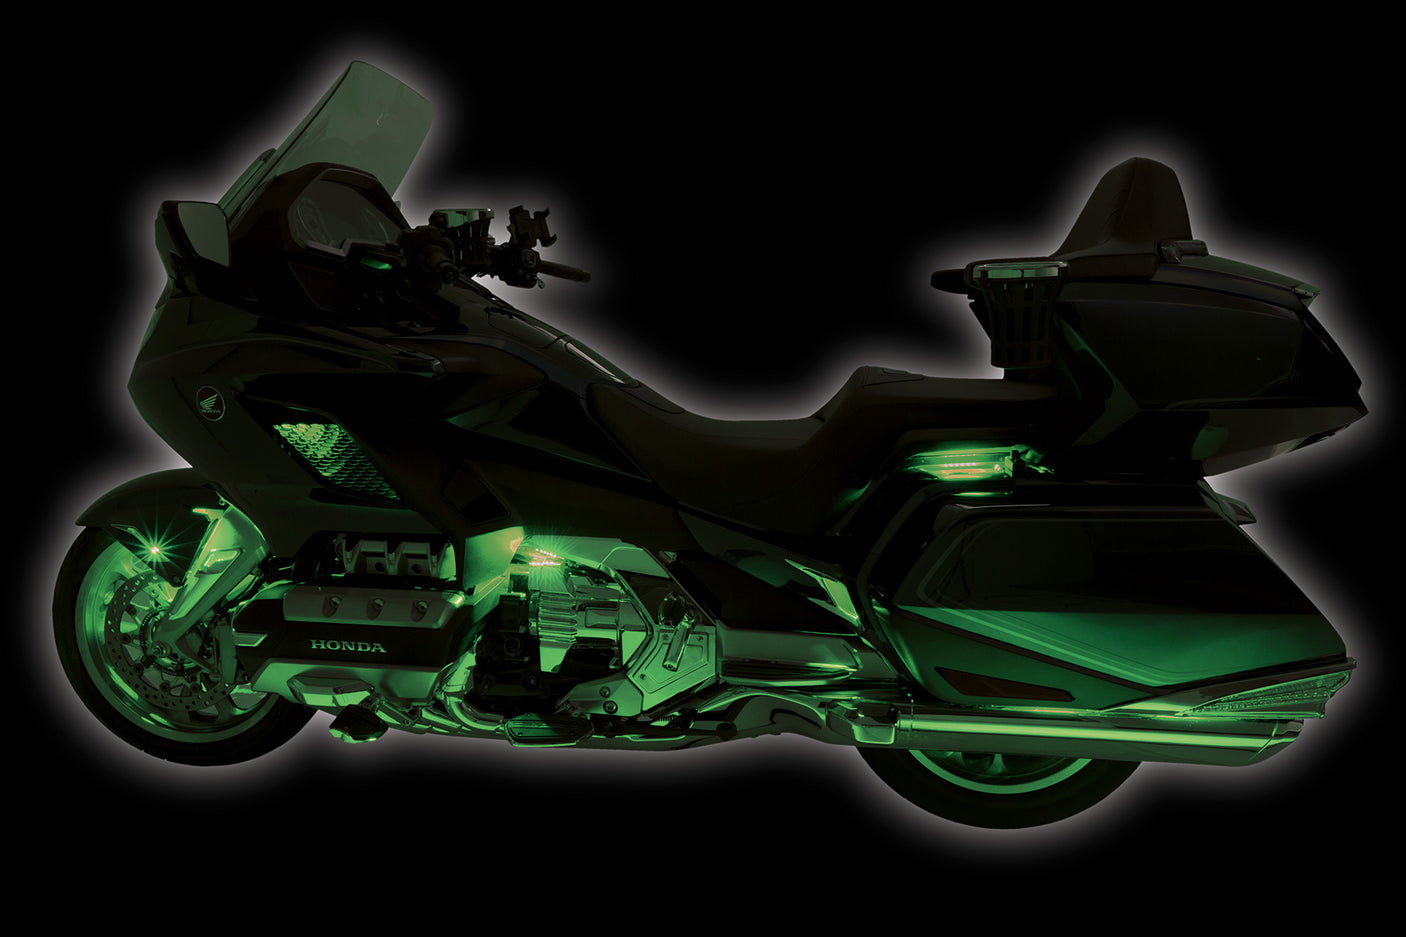 Build Your Own Advanced Million Color LED Motorcycle Lighting Kit